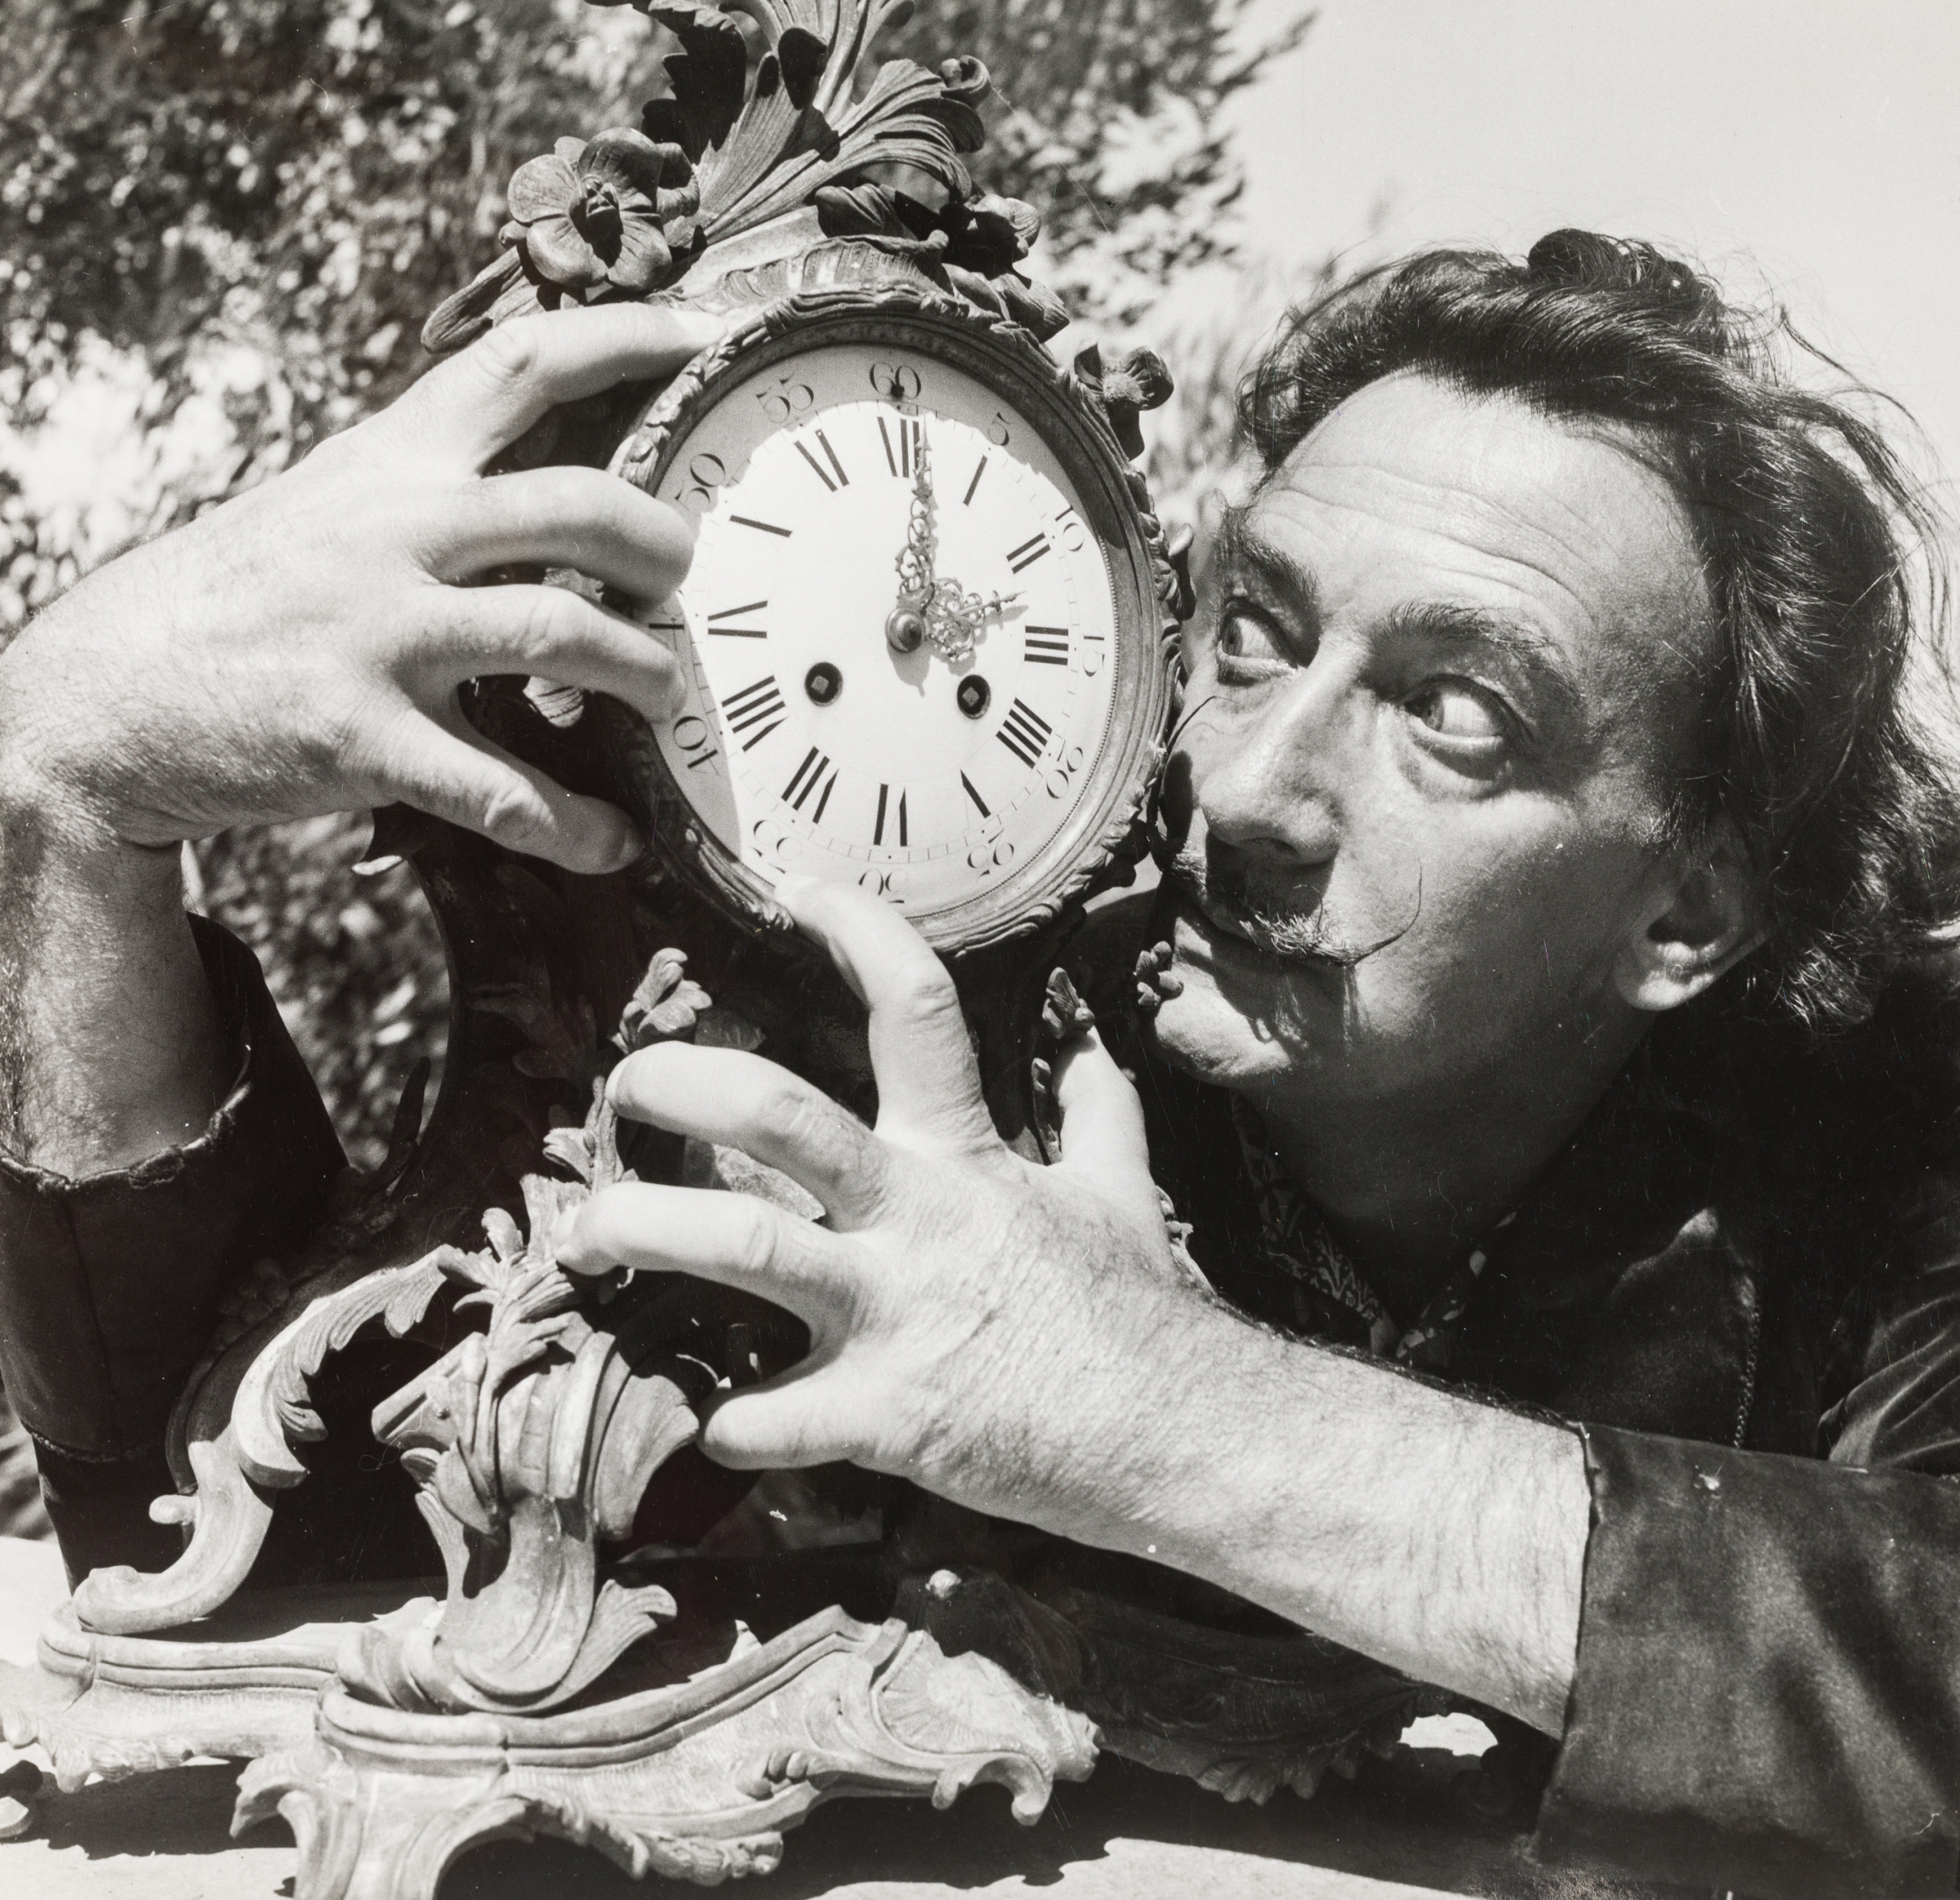 Charles Henry Hewitt, Salvador Dali (aus der Fotostrecke "A day with Dali", Picture Post)